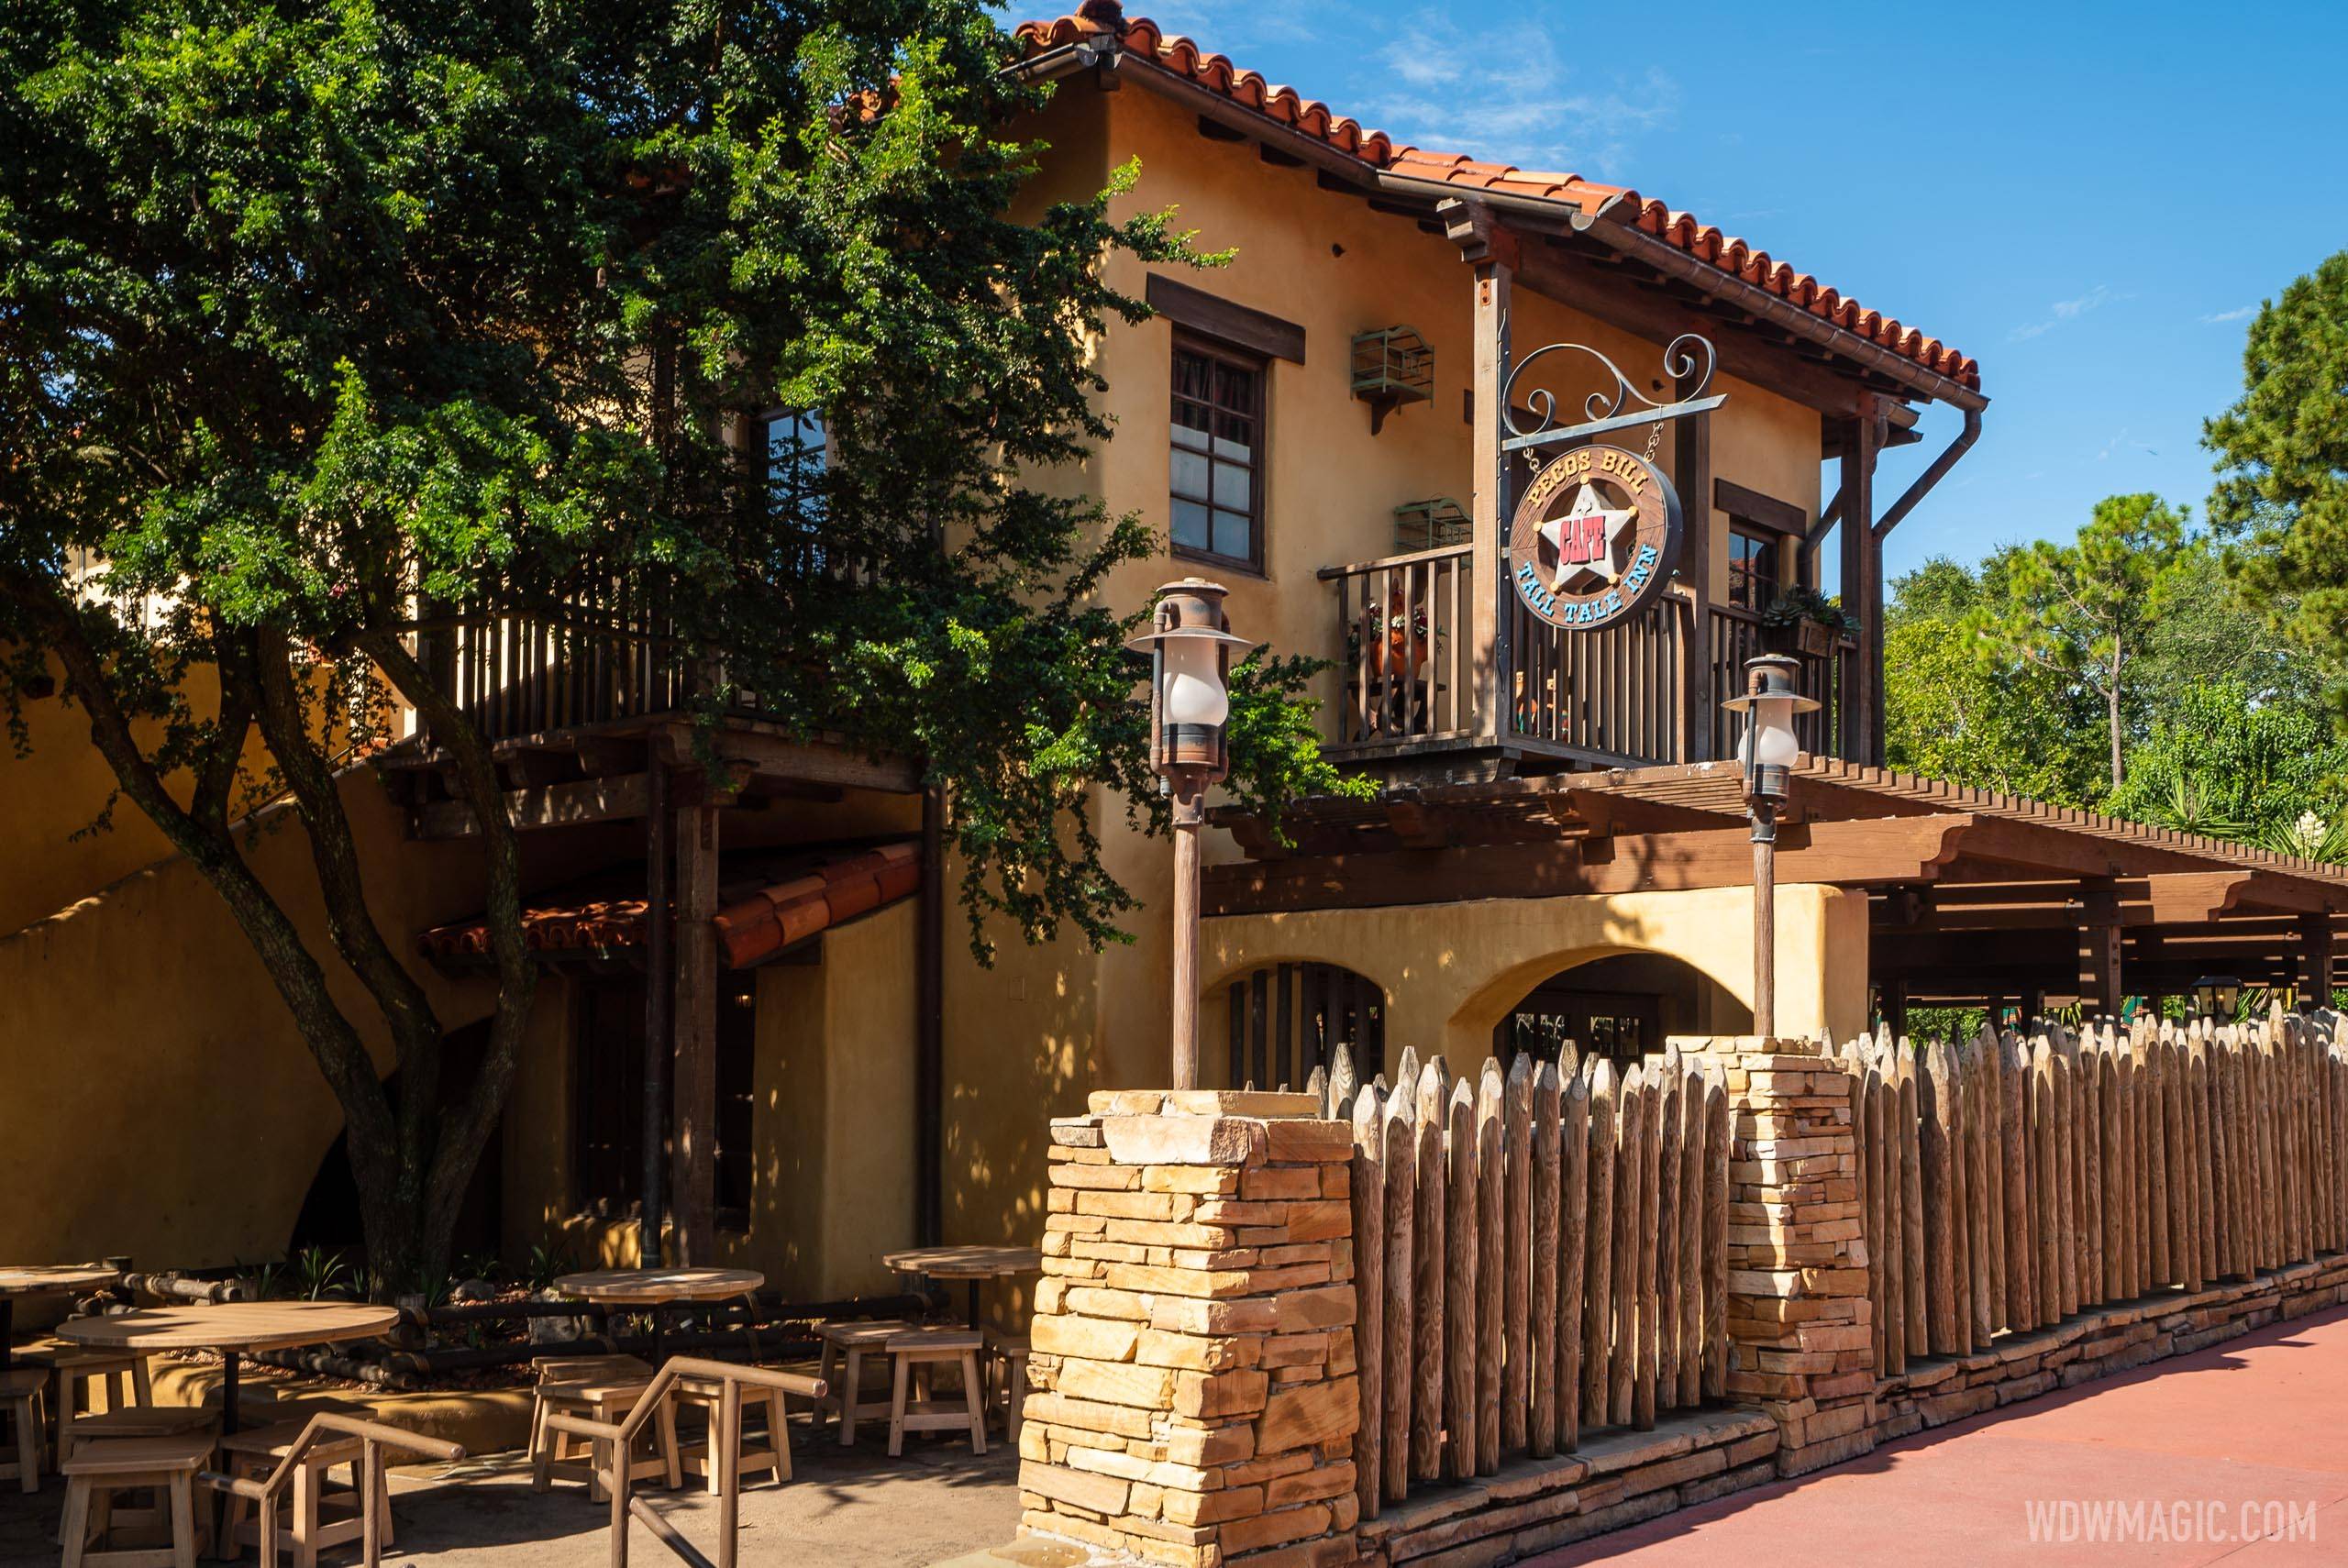 Pecos Bill cafe overview